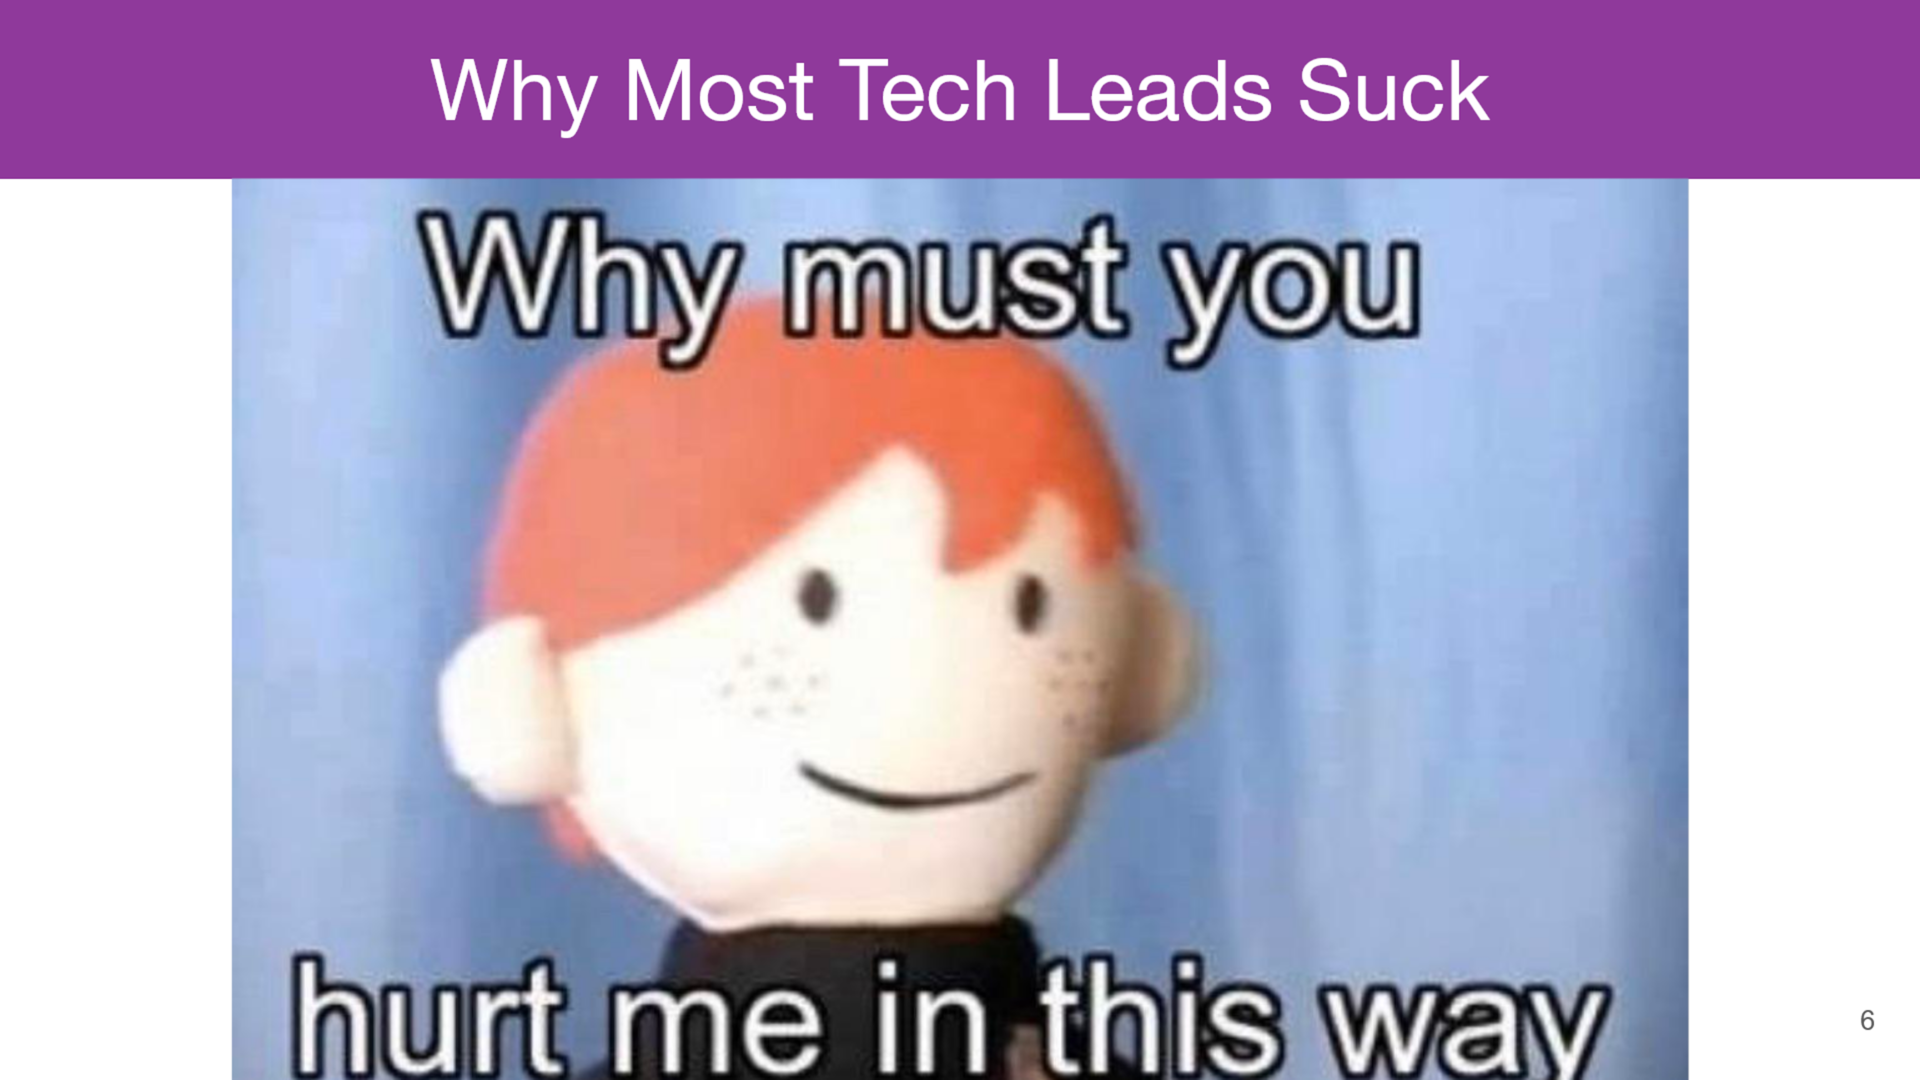 How To Be An Effective Tech Lead [Part 2] - Why Most Tech Leads Suck